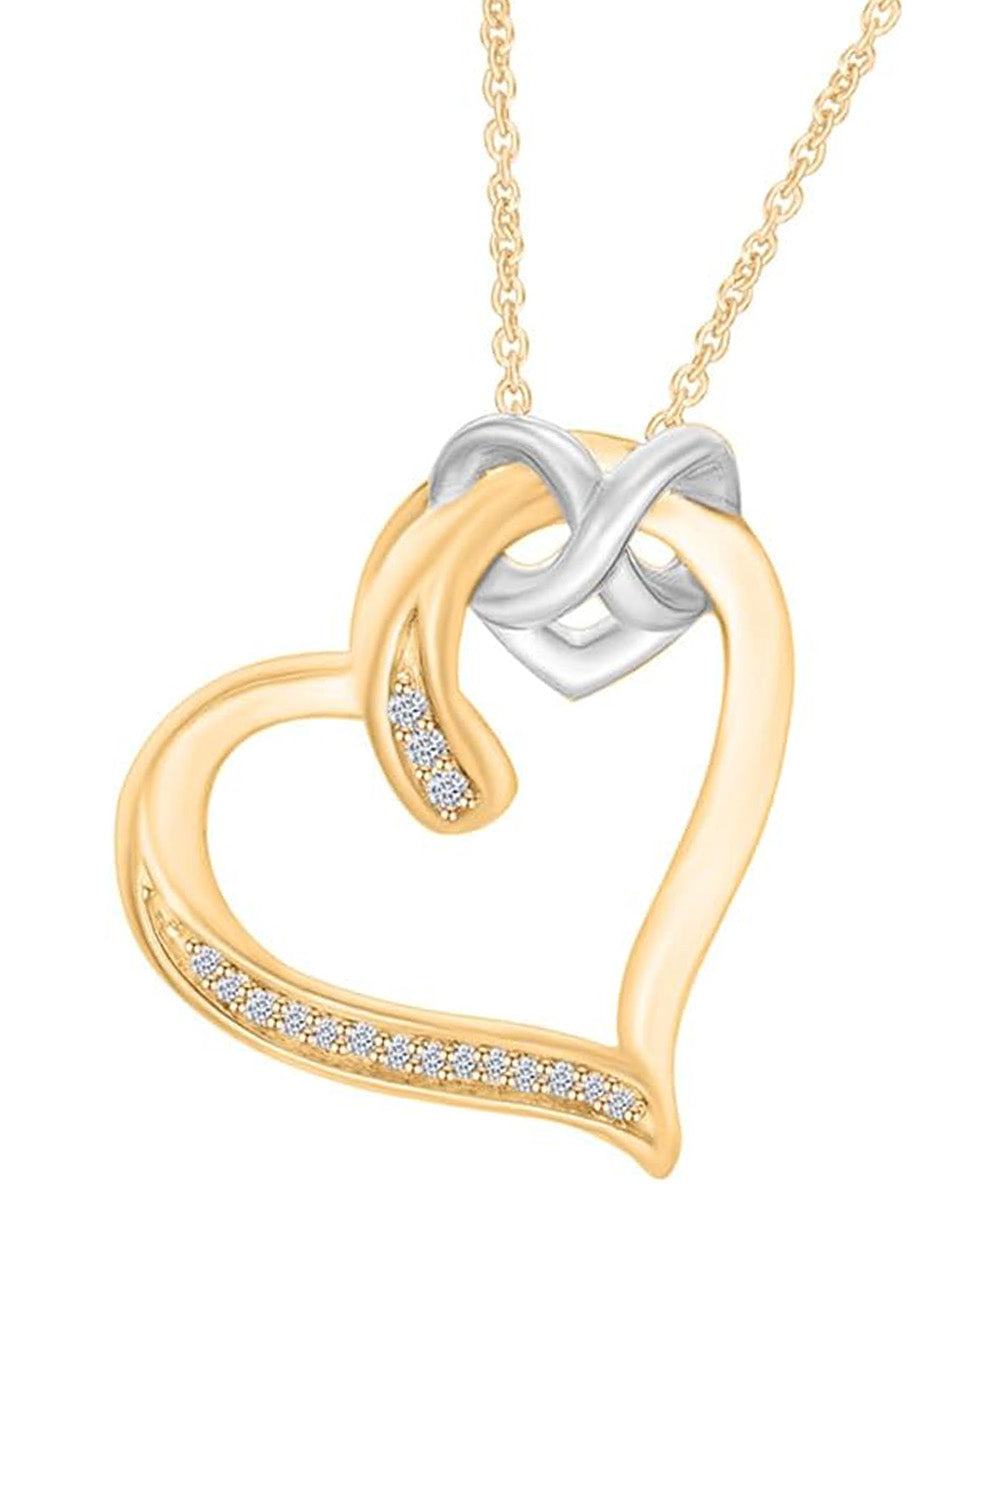 Yellow Gold Color Interlocking Infinity Love Heart Pendant Necklace 